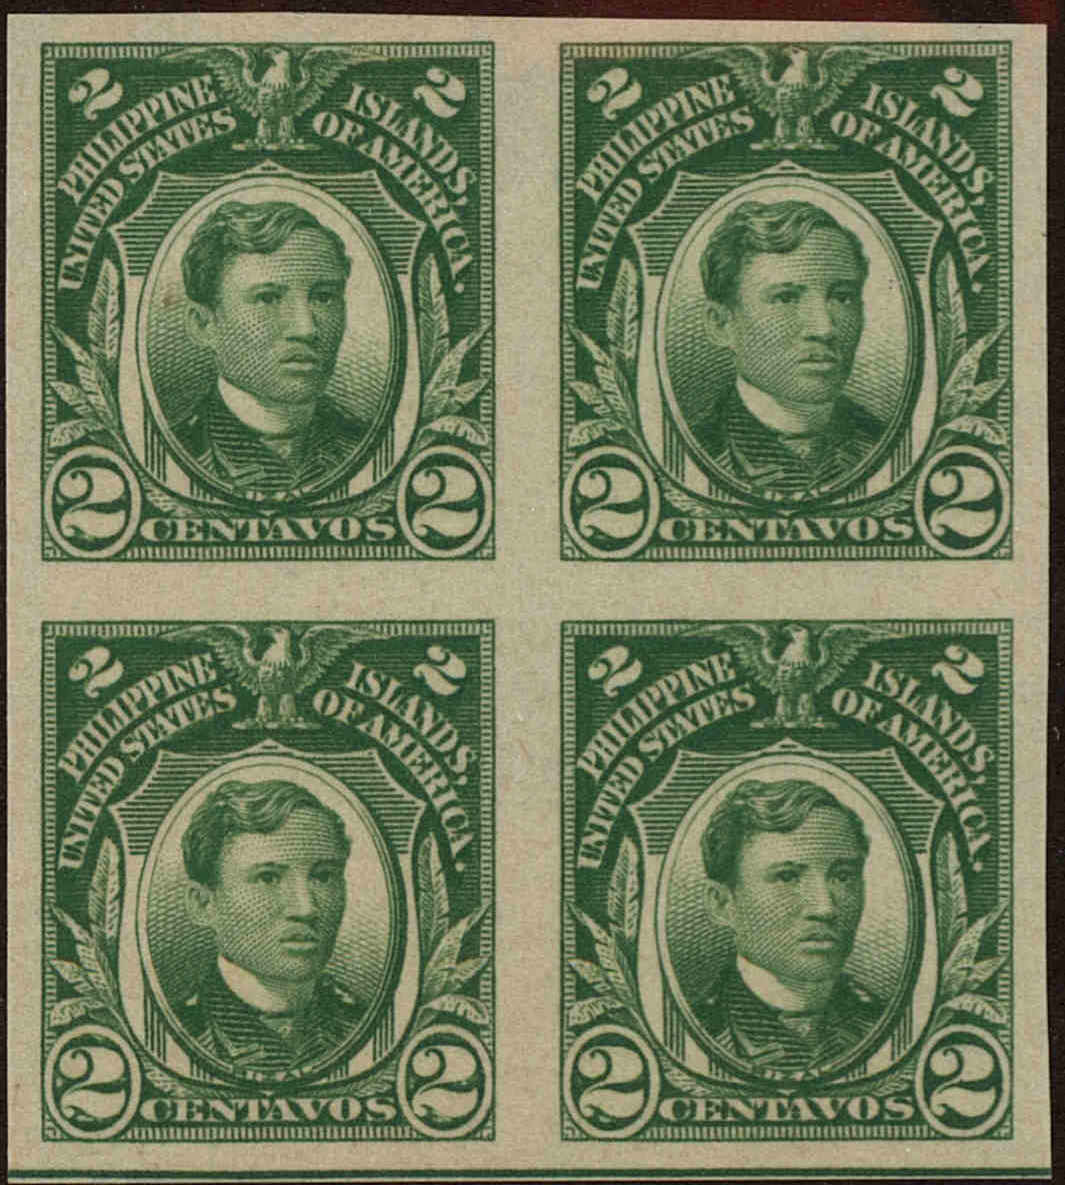 Front view of Philippines (US) 340 collectors stamp